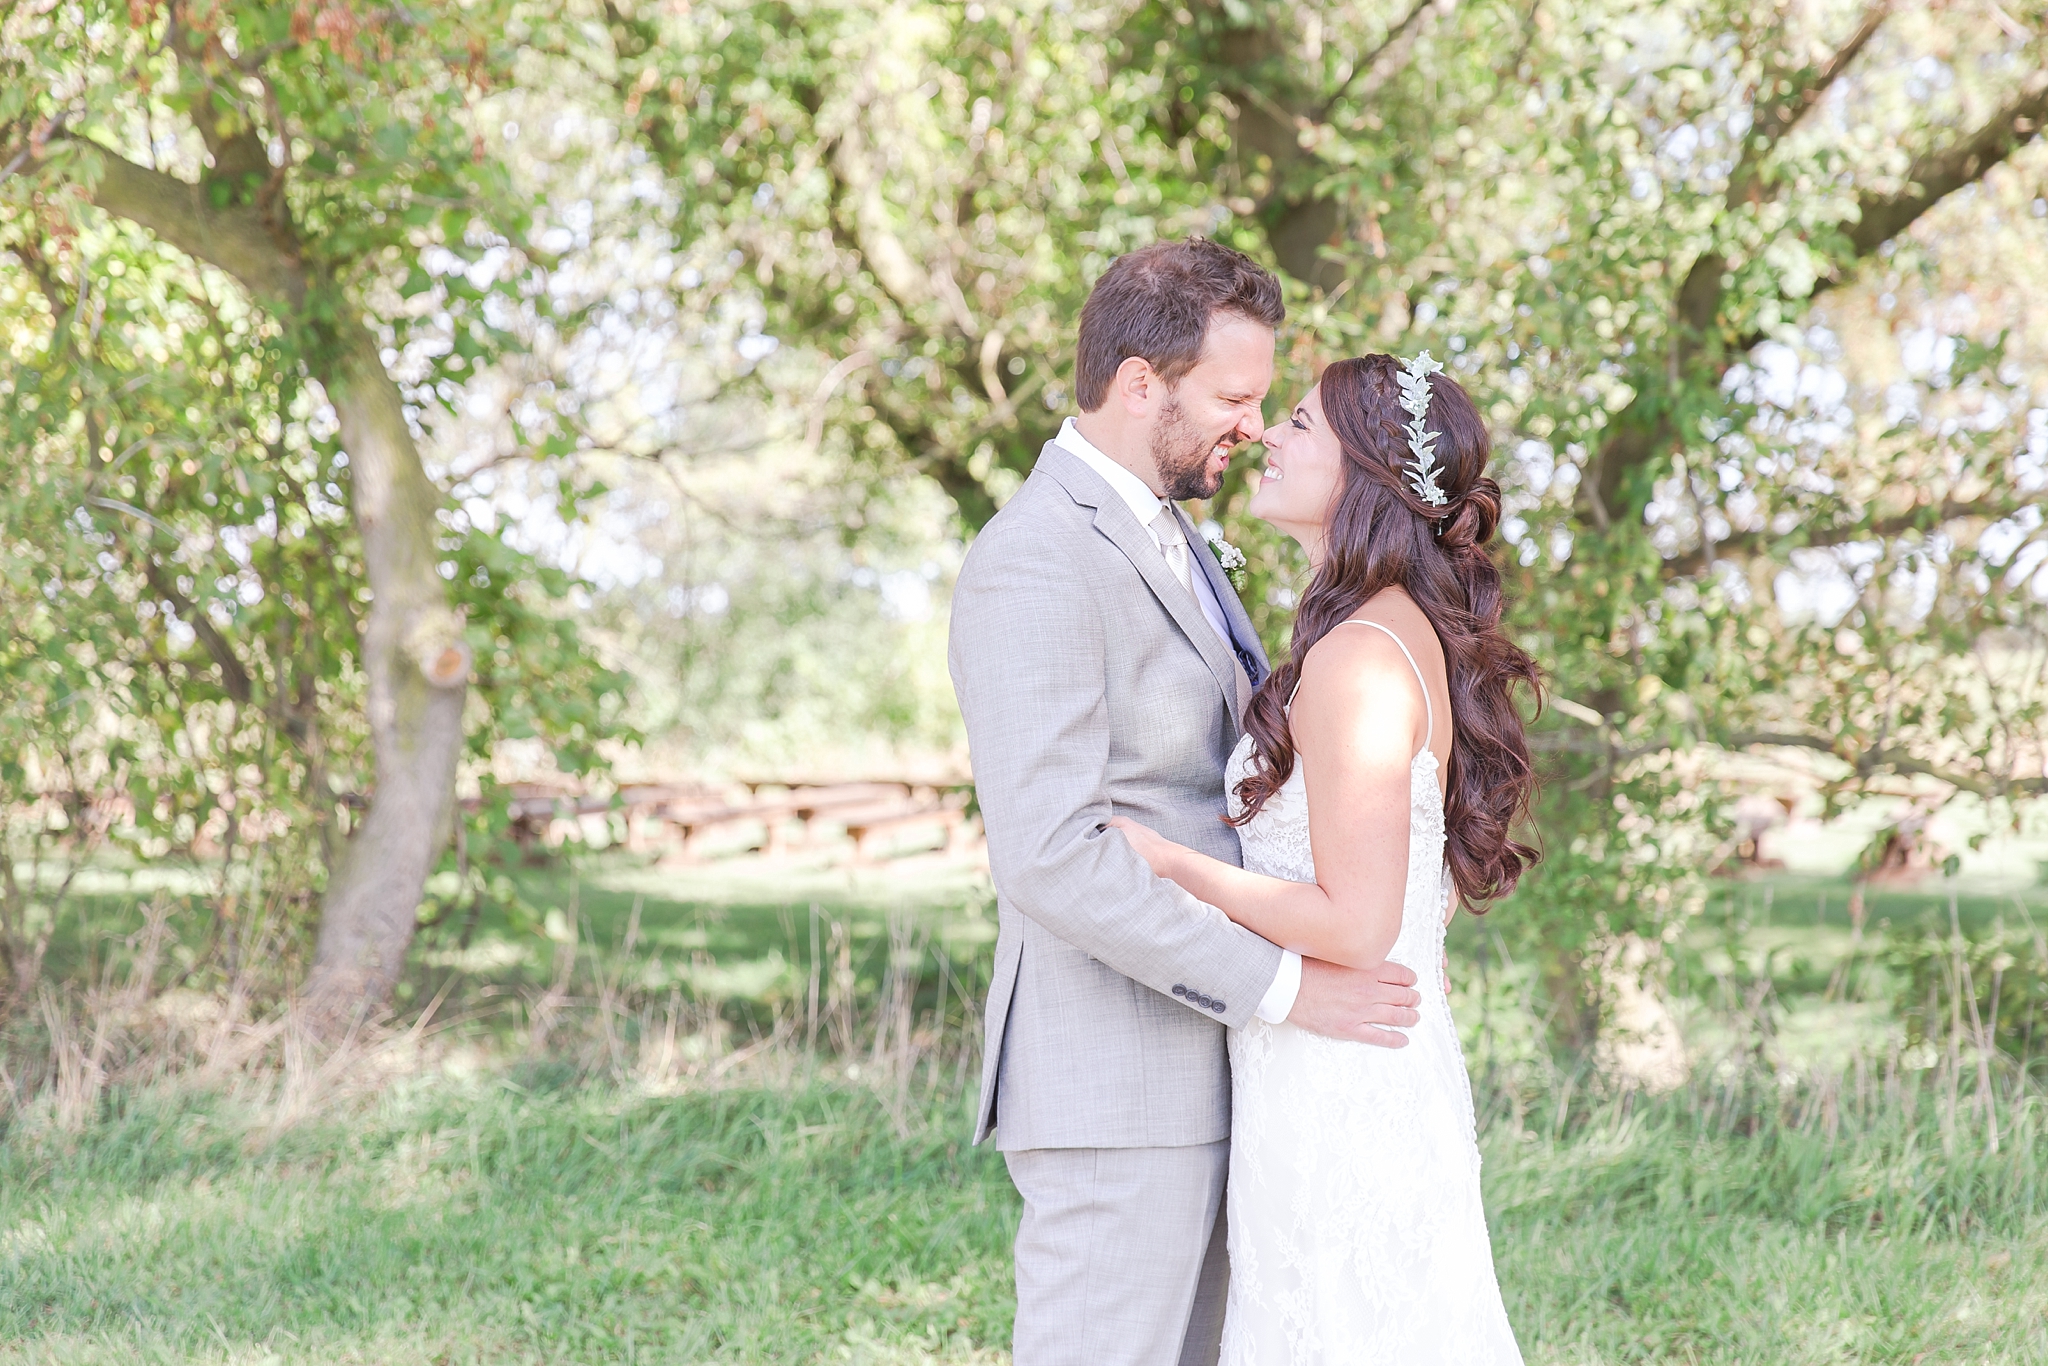 natural-rustic-wedding-photos-at-frutig-farms-the-valley-in-ann-arbor-michigan-by-courtney-carolyn-photography_0032.jpg